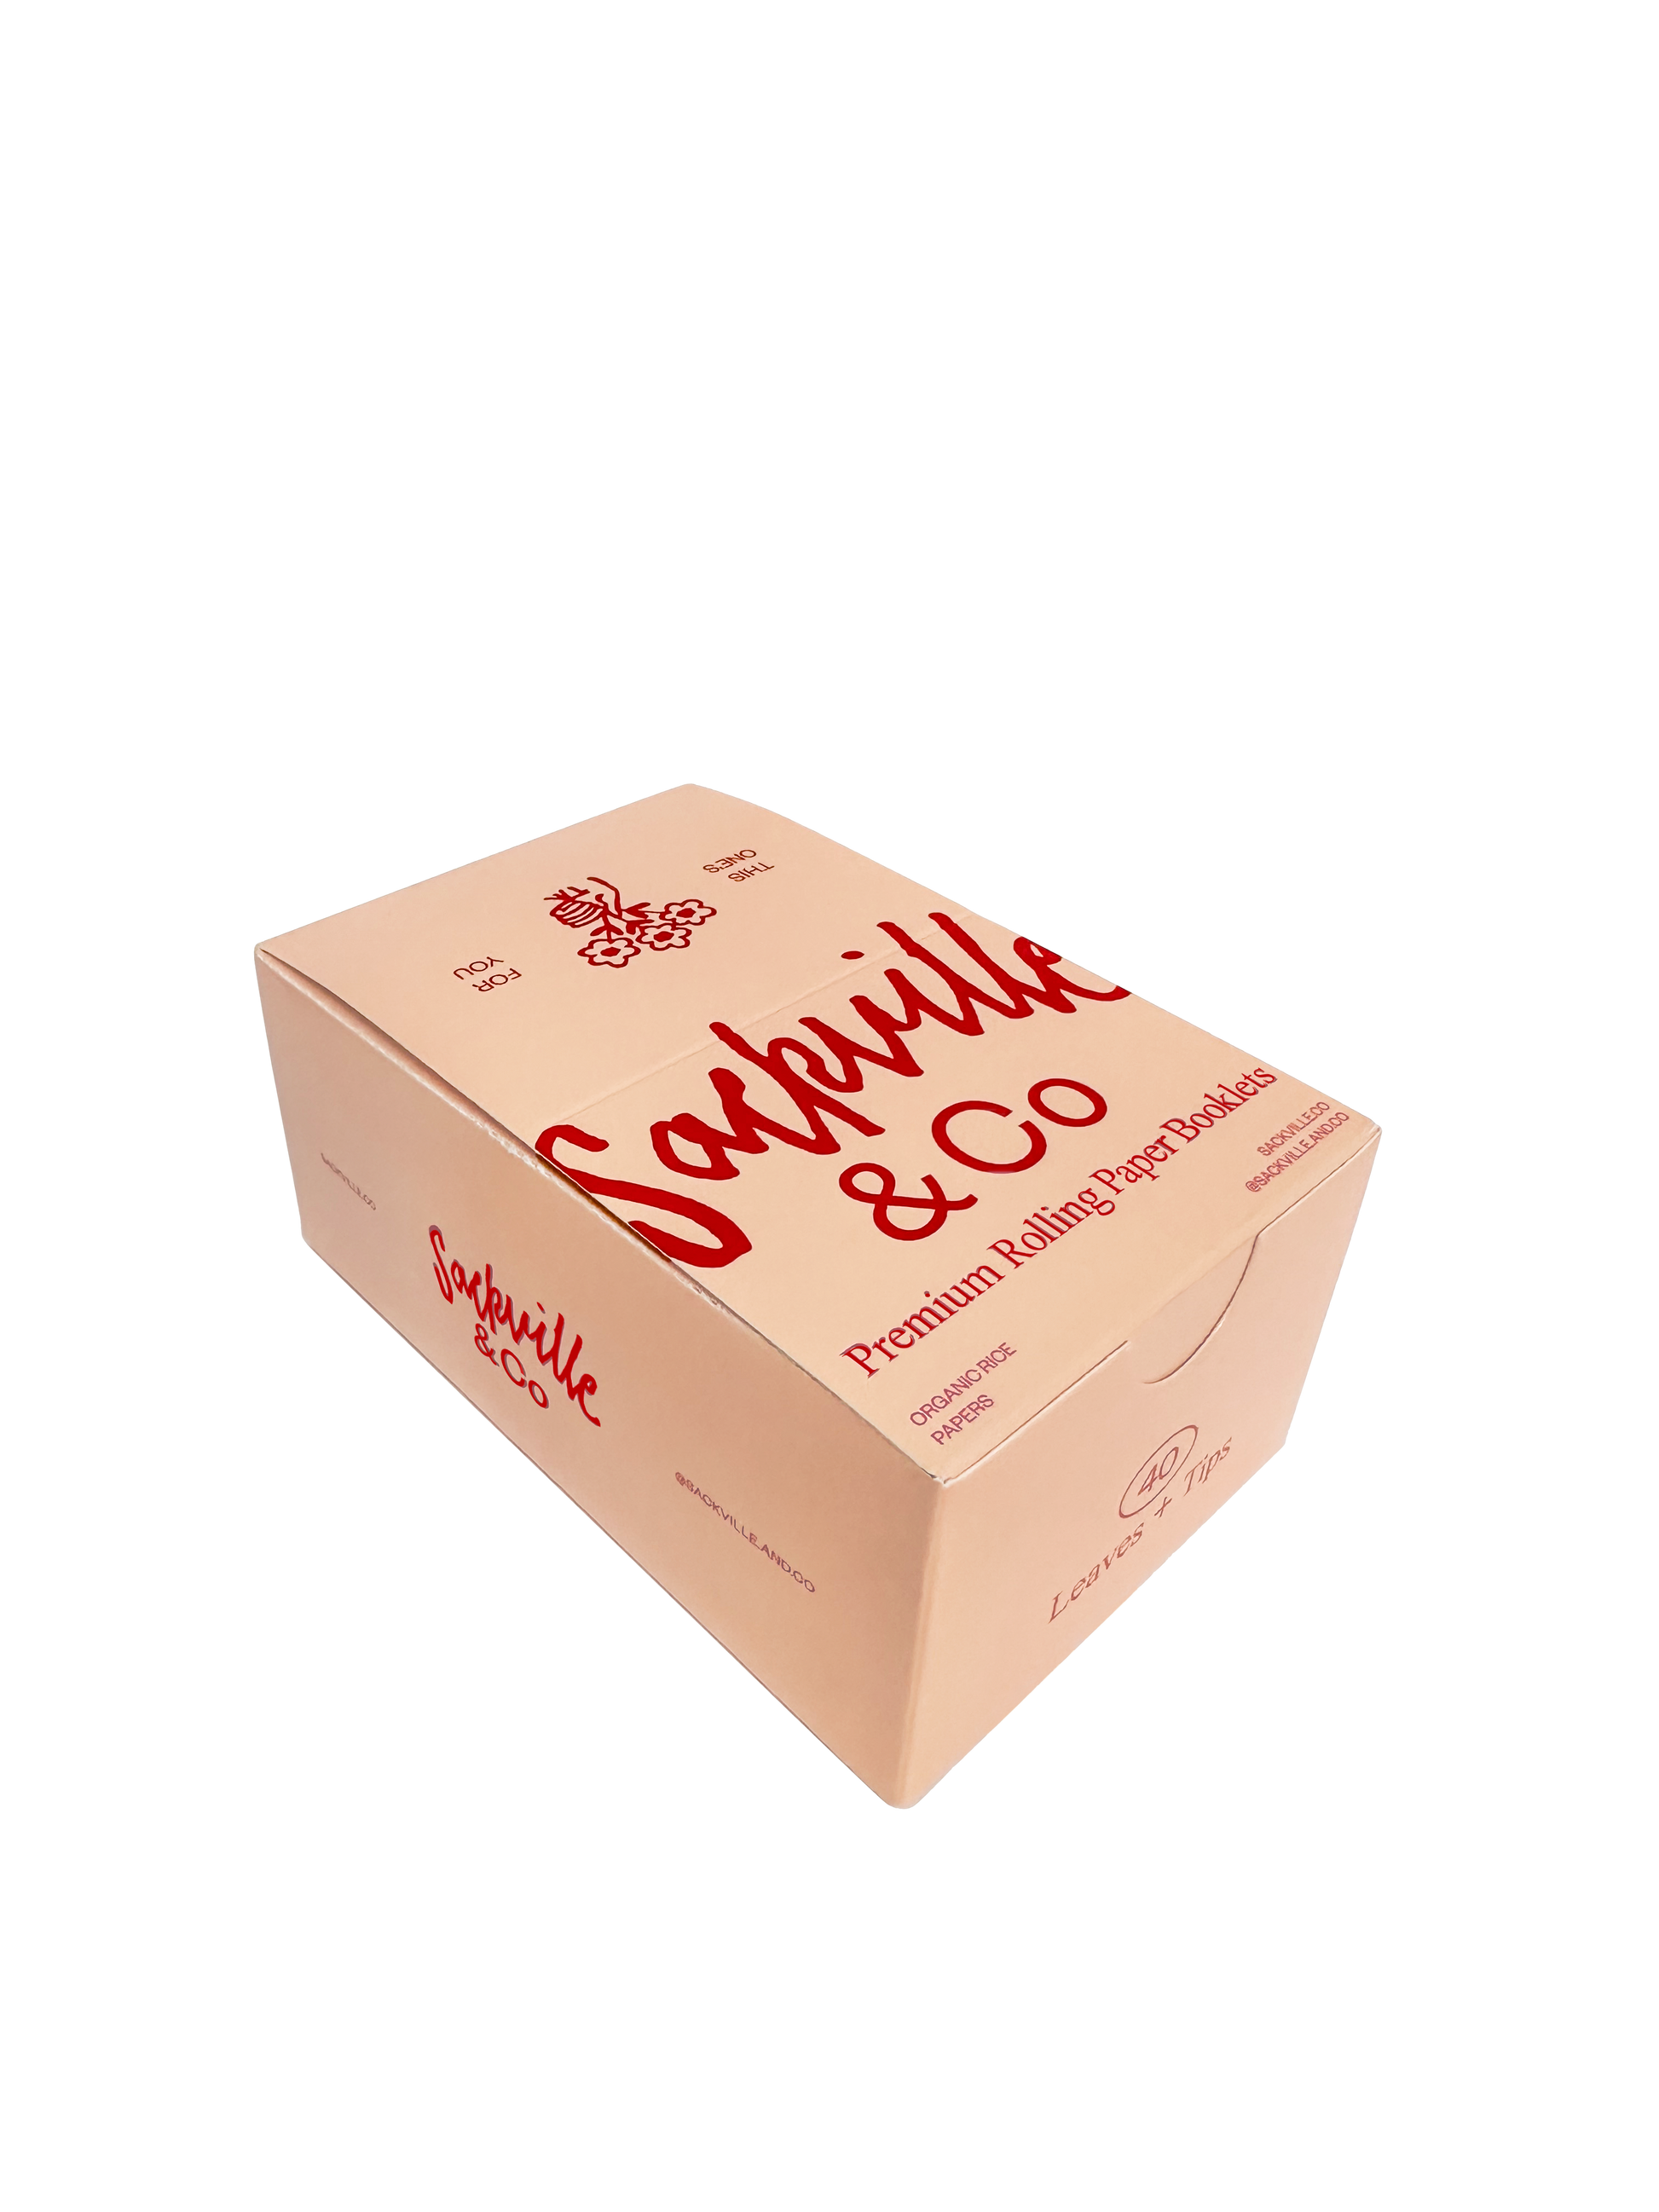 Floral Pink Rolling Papers - 22 Case - Sackville & Co.